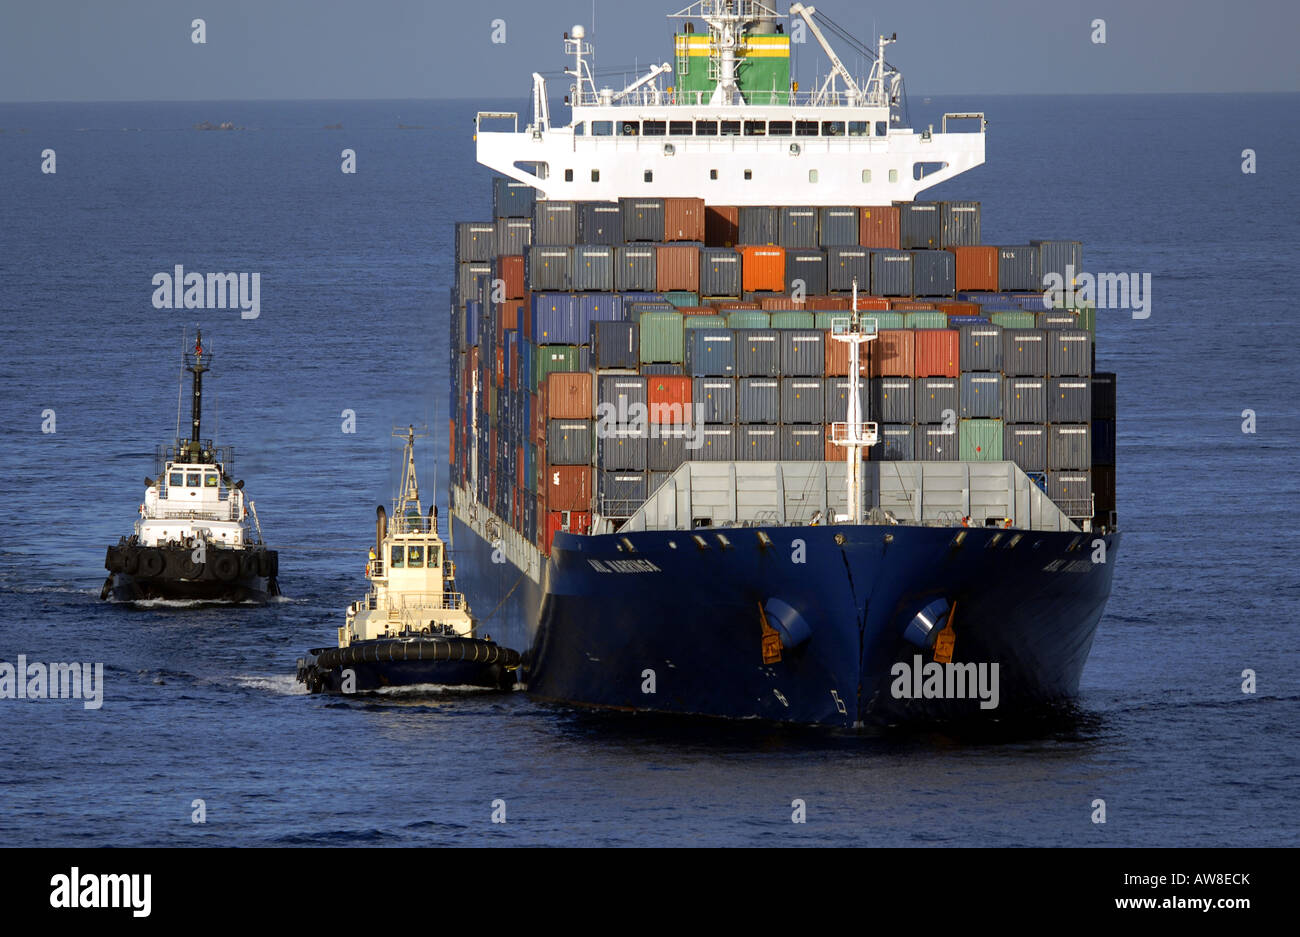 Two small tug boats guide a large container ship into harbour Stock Photo